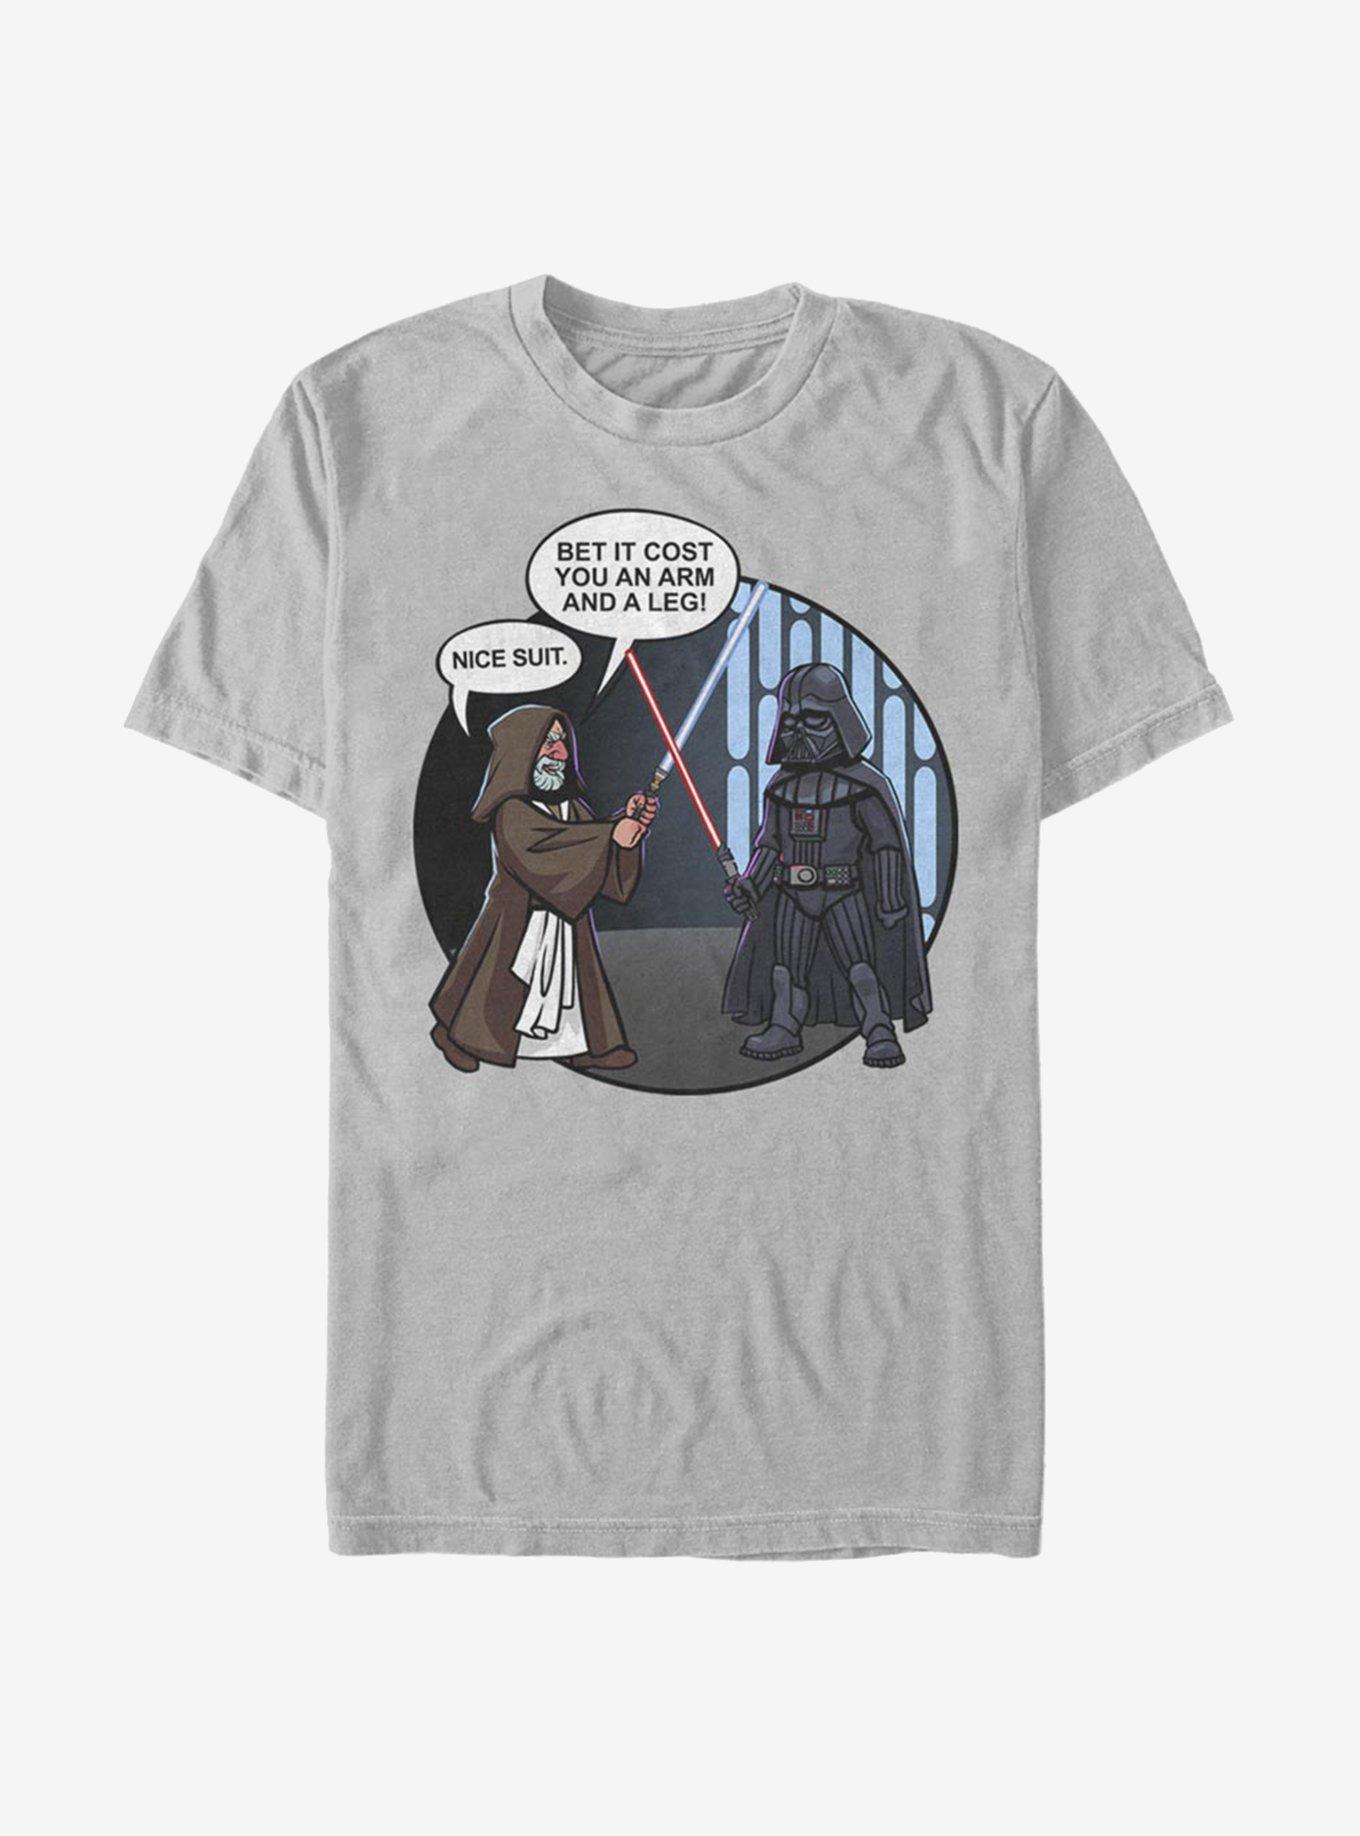 Star Wars Nice Suit T-Shirt, SILVER, hi-res